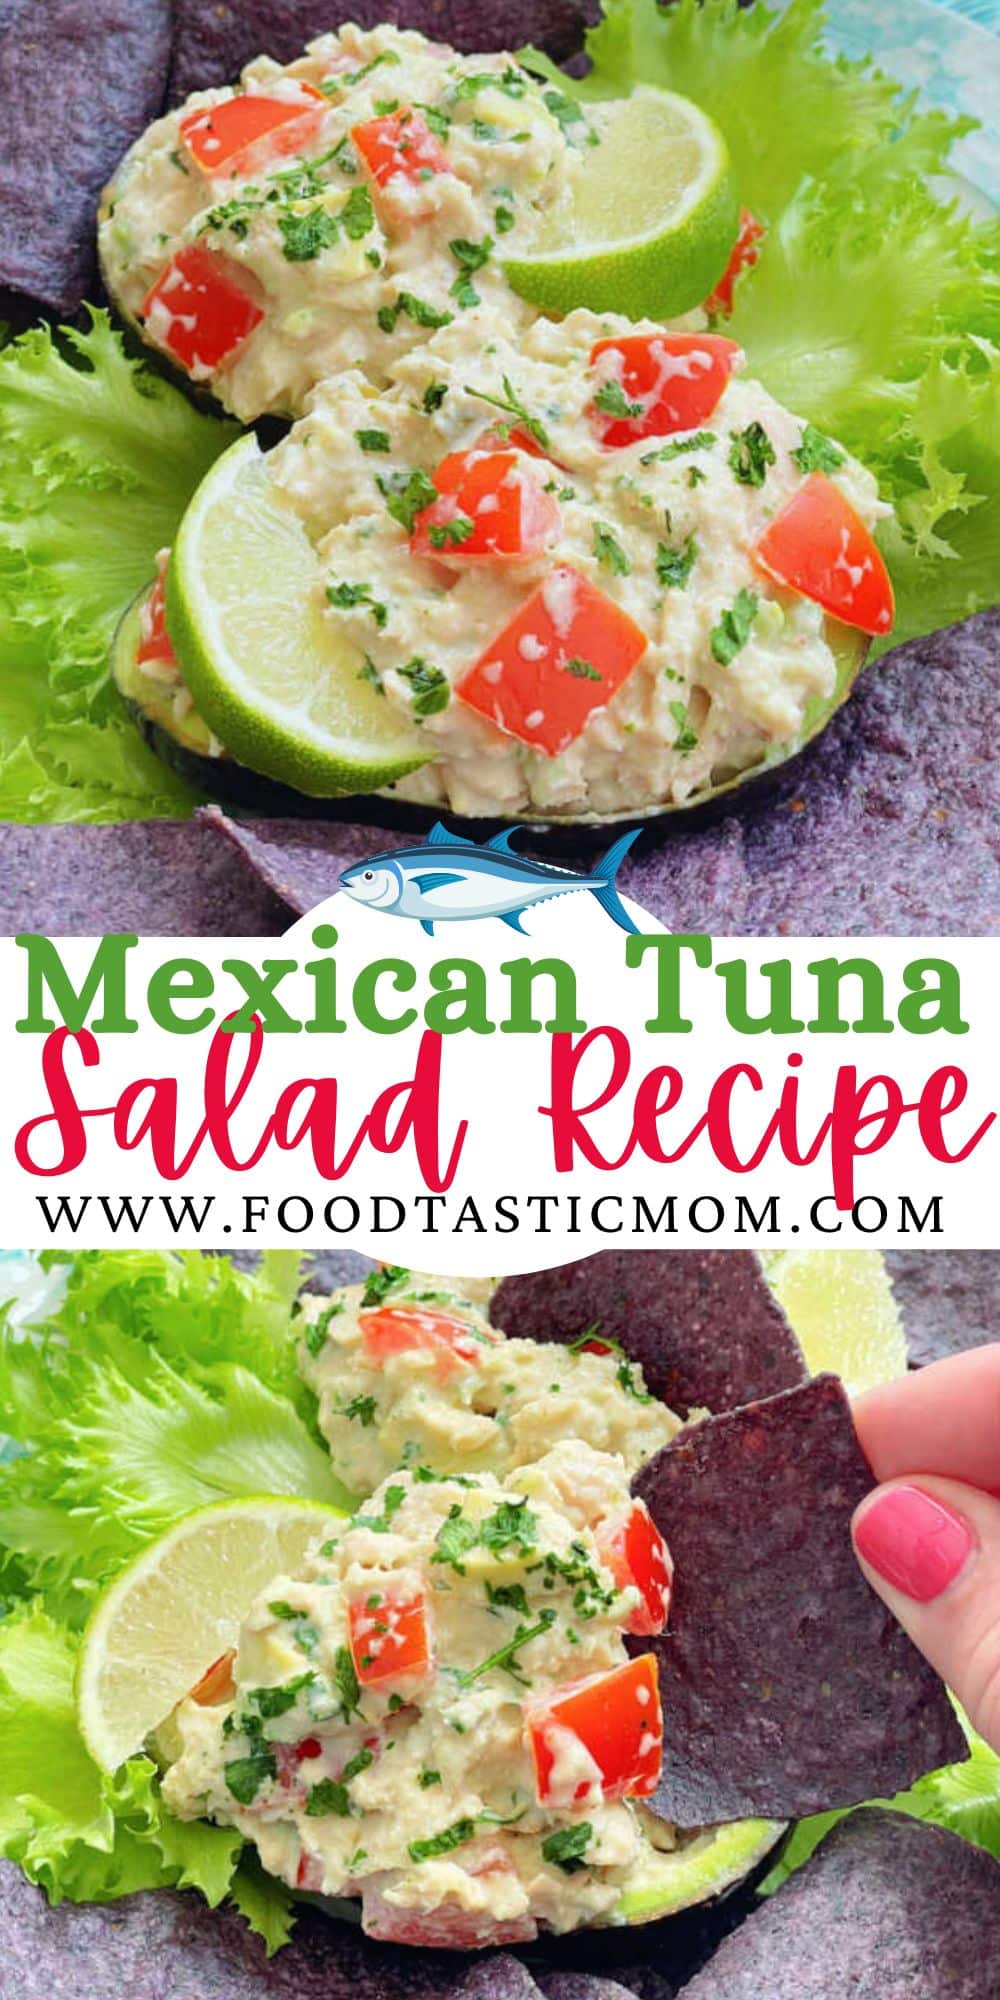 Mexican Tuna Salad spices up a classic, for a high-protein lunch or snack. Tomatoes, avocado, taco sauce, sour cream and lime juice help make this salad a hit. via @foodtasticmom